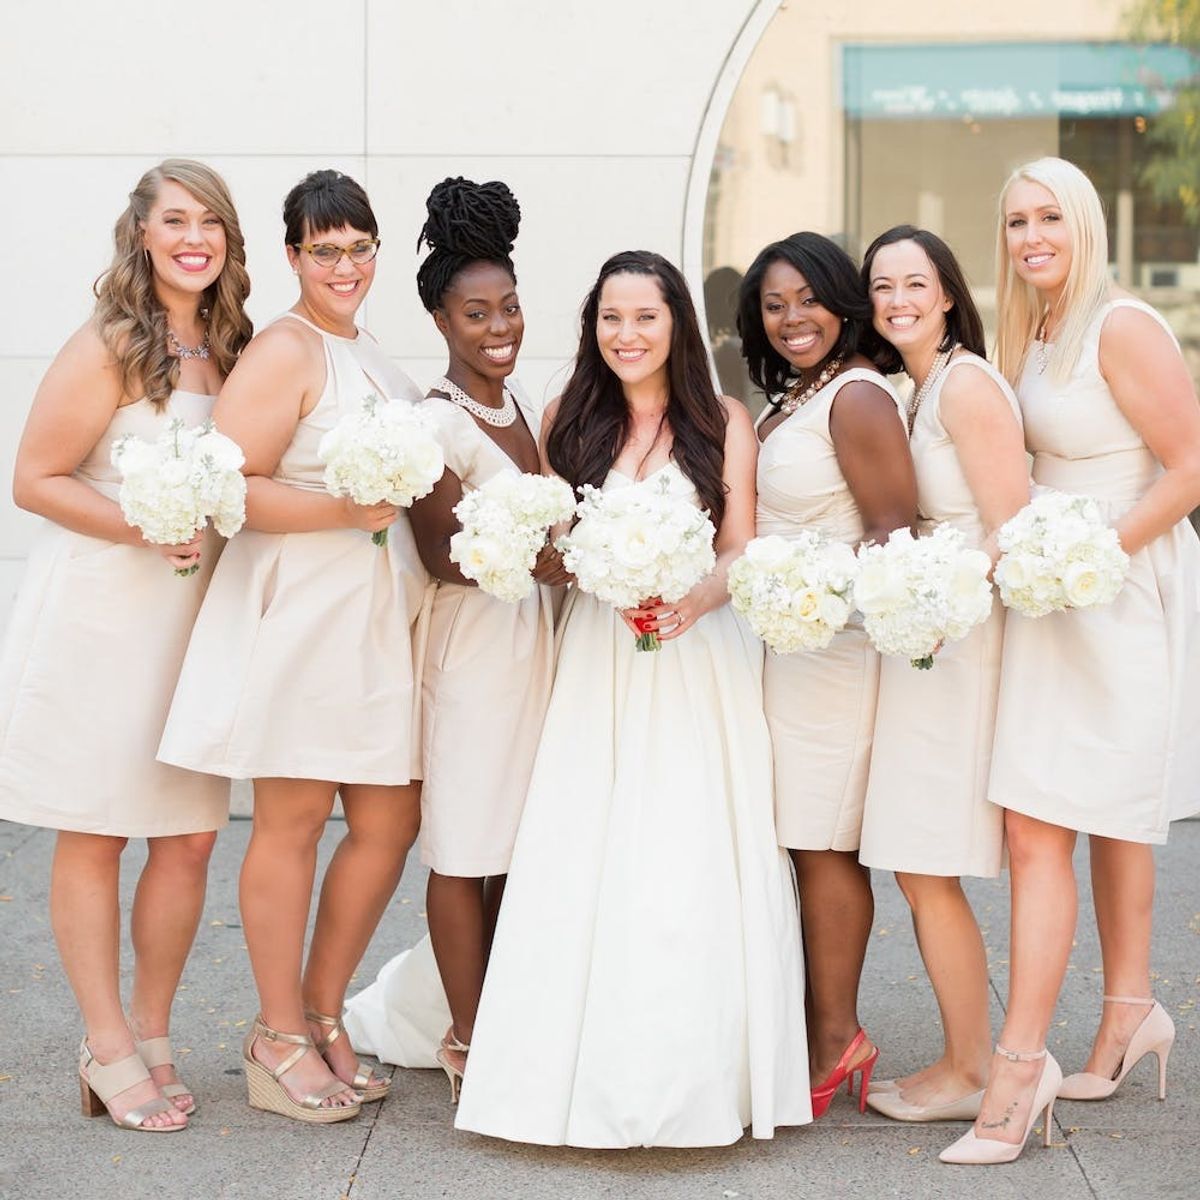 8 Reasons Why It’s Actually Okay to Ditch Your Bridal Party